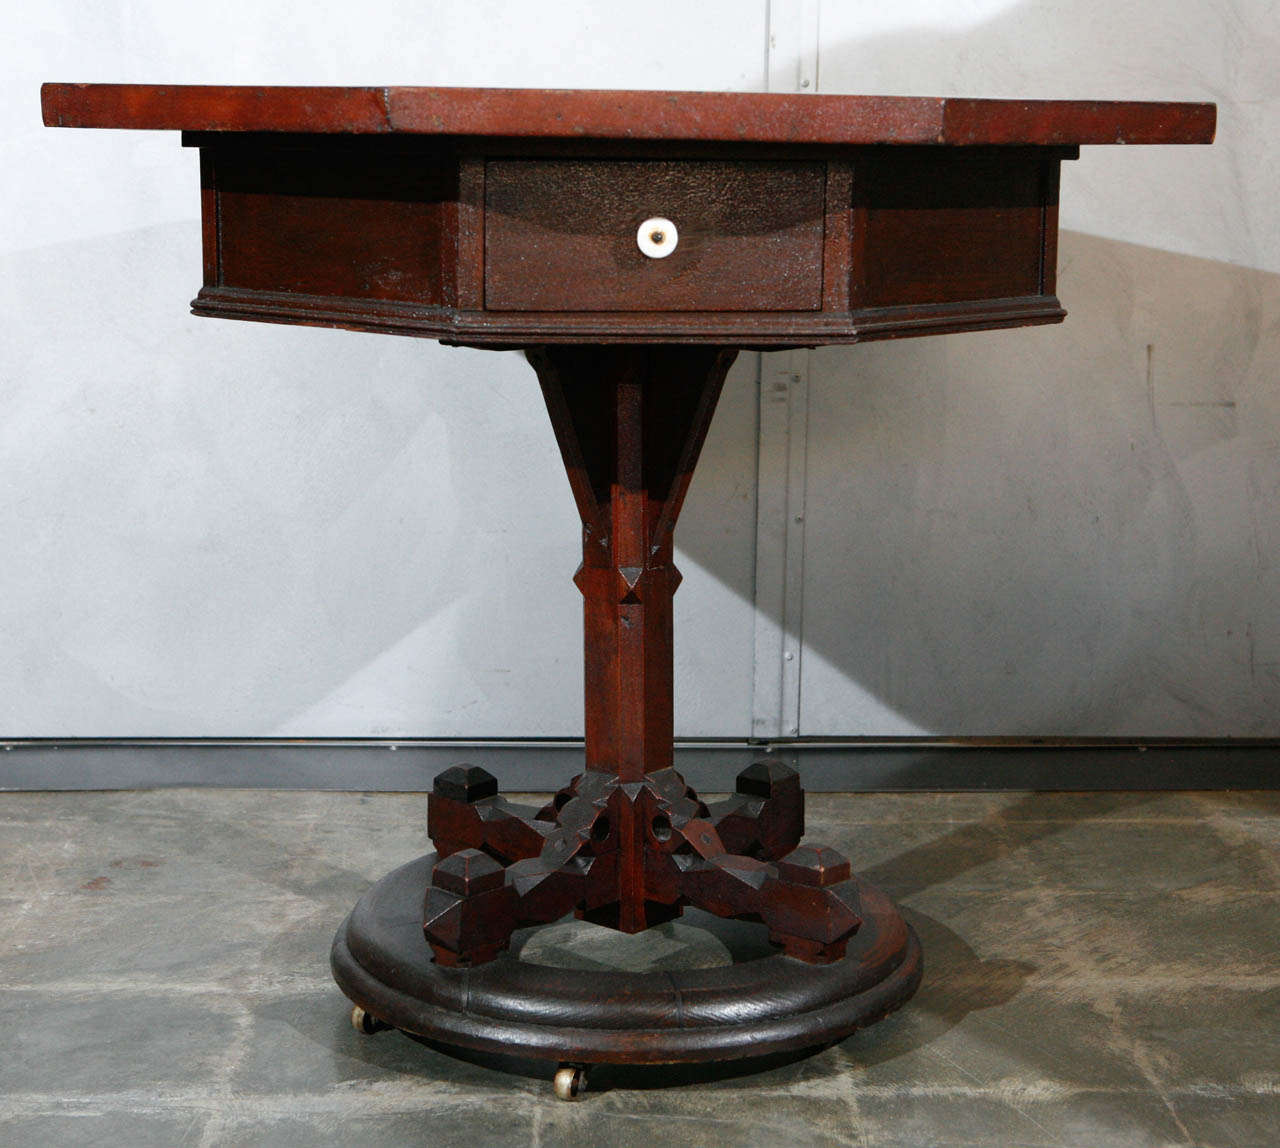 A most unusual and interesting American, 19th century, table having an octagonal top, recessed skirt with two drawers, on a central column which stands on a circular base with wheels. The top has a mysterious and intriguing panel veneered in exotic